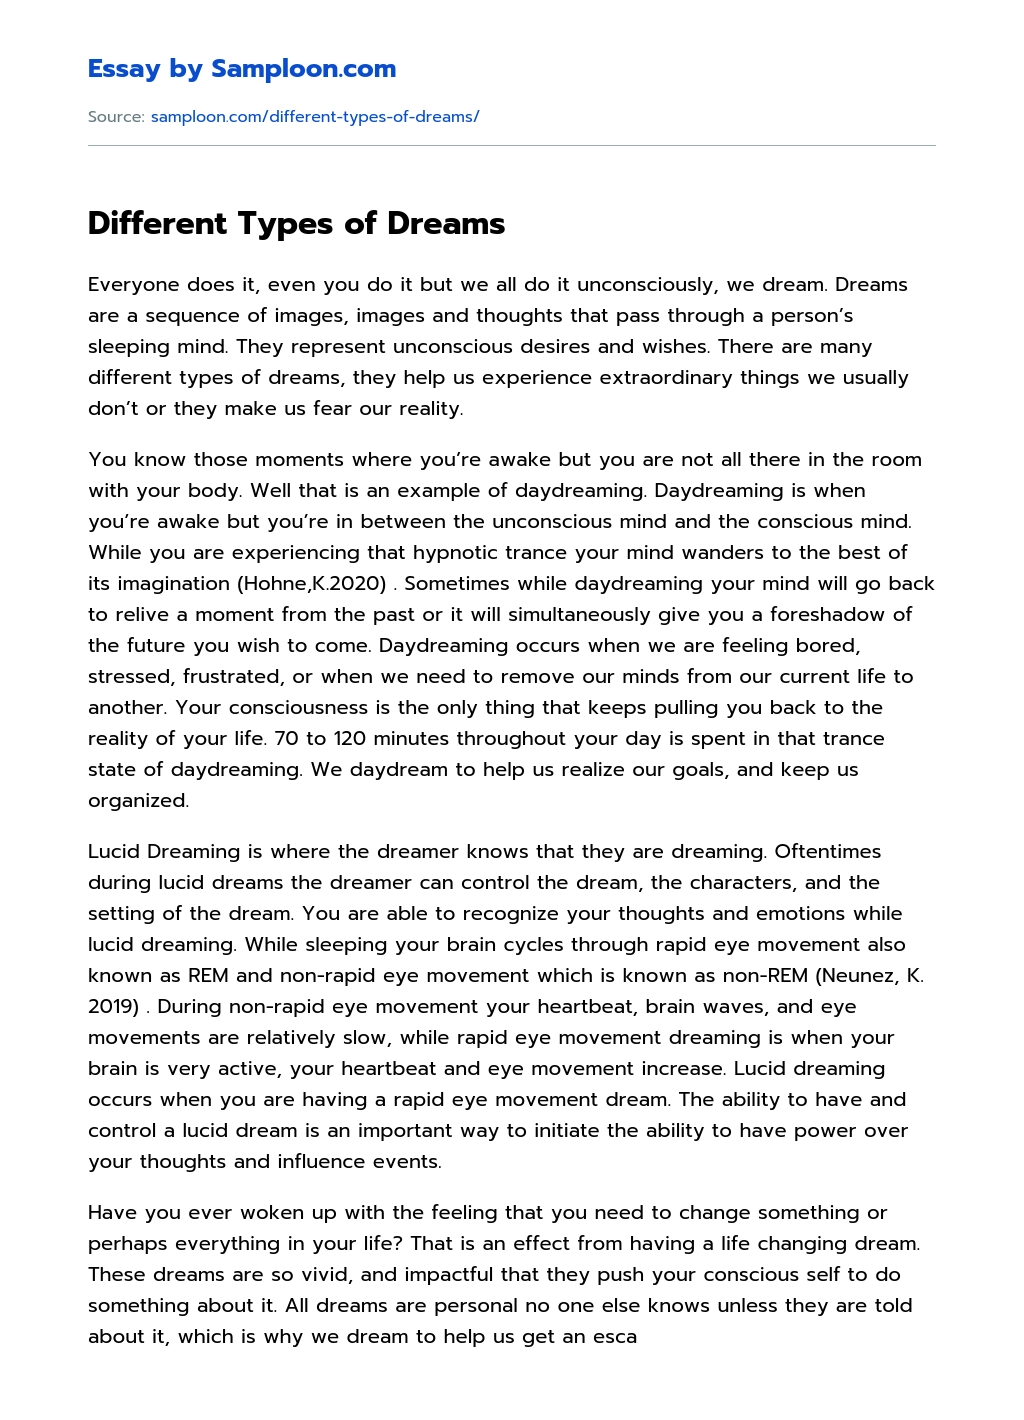 Different Types of Dreams essay